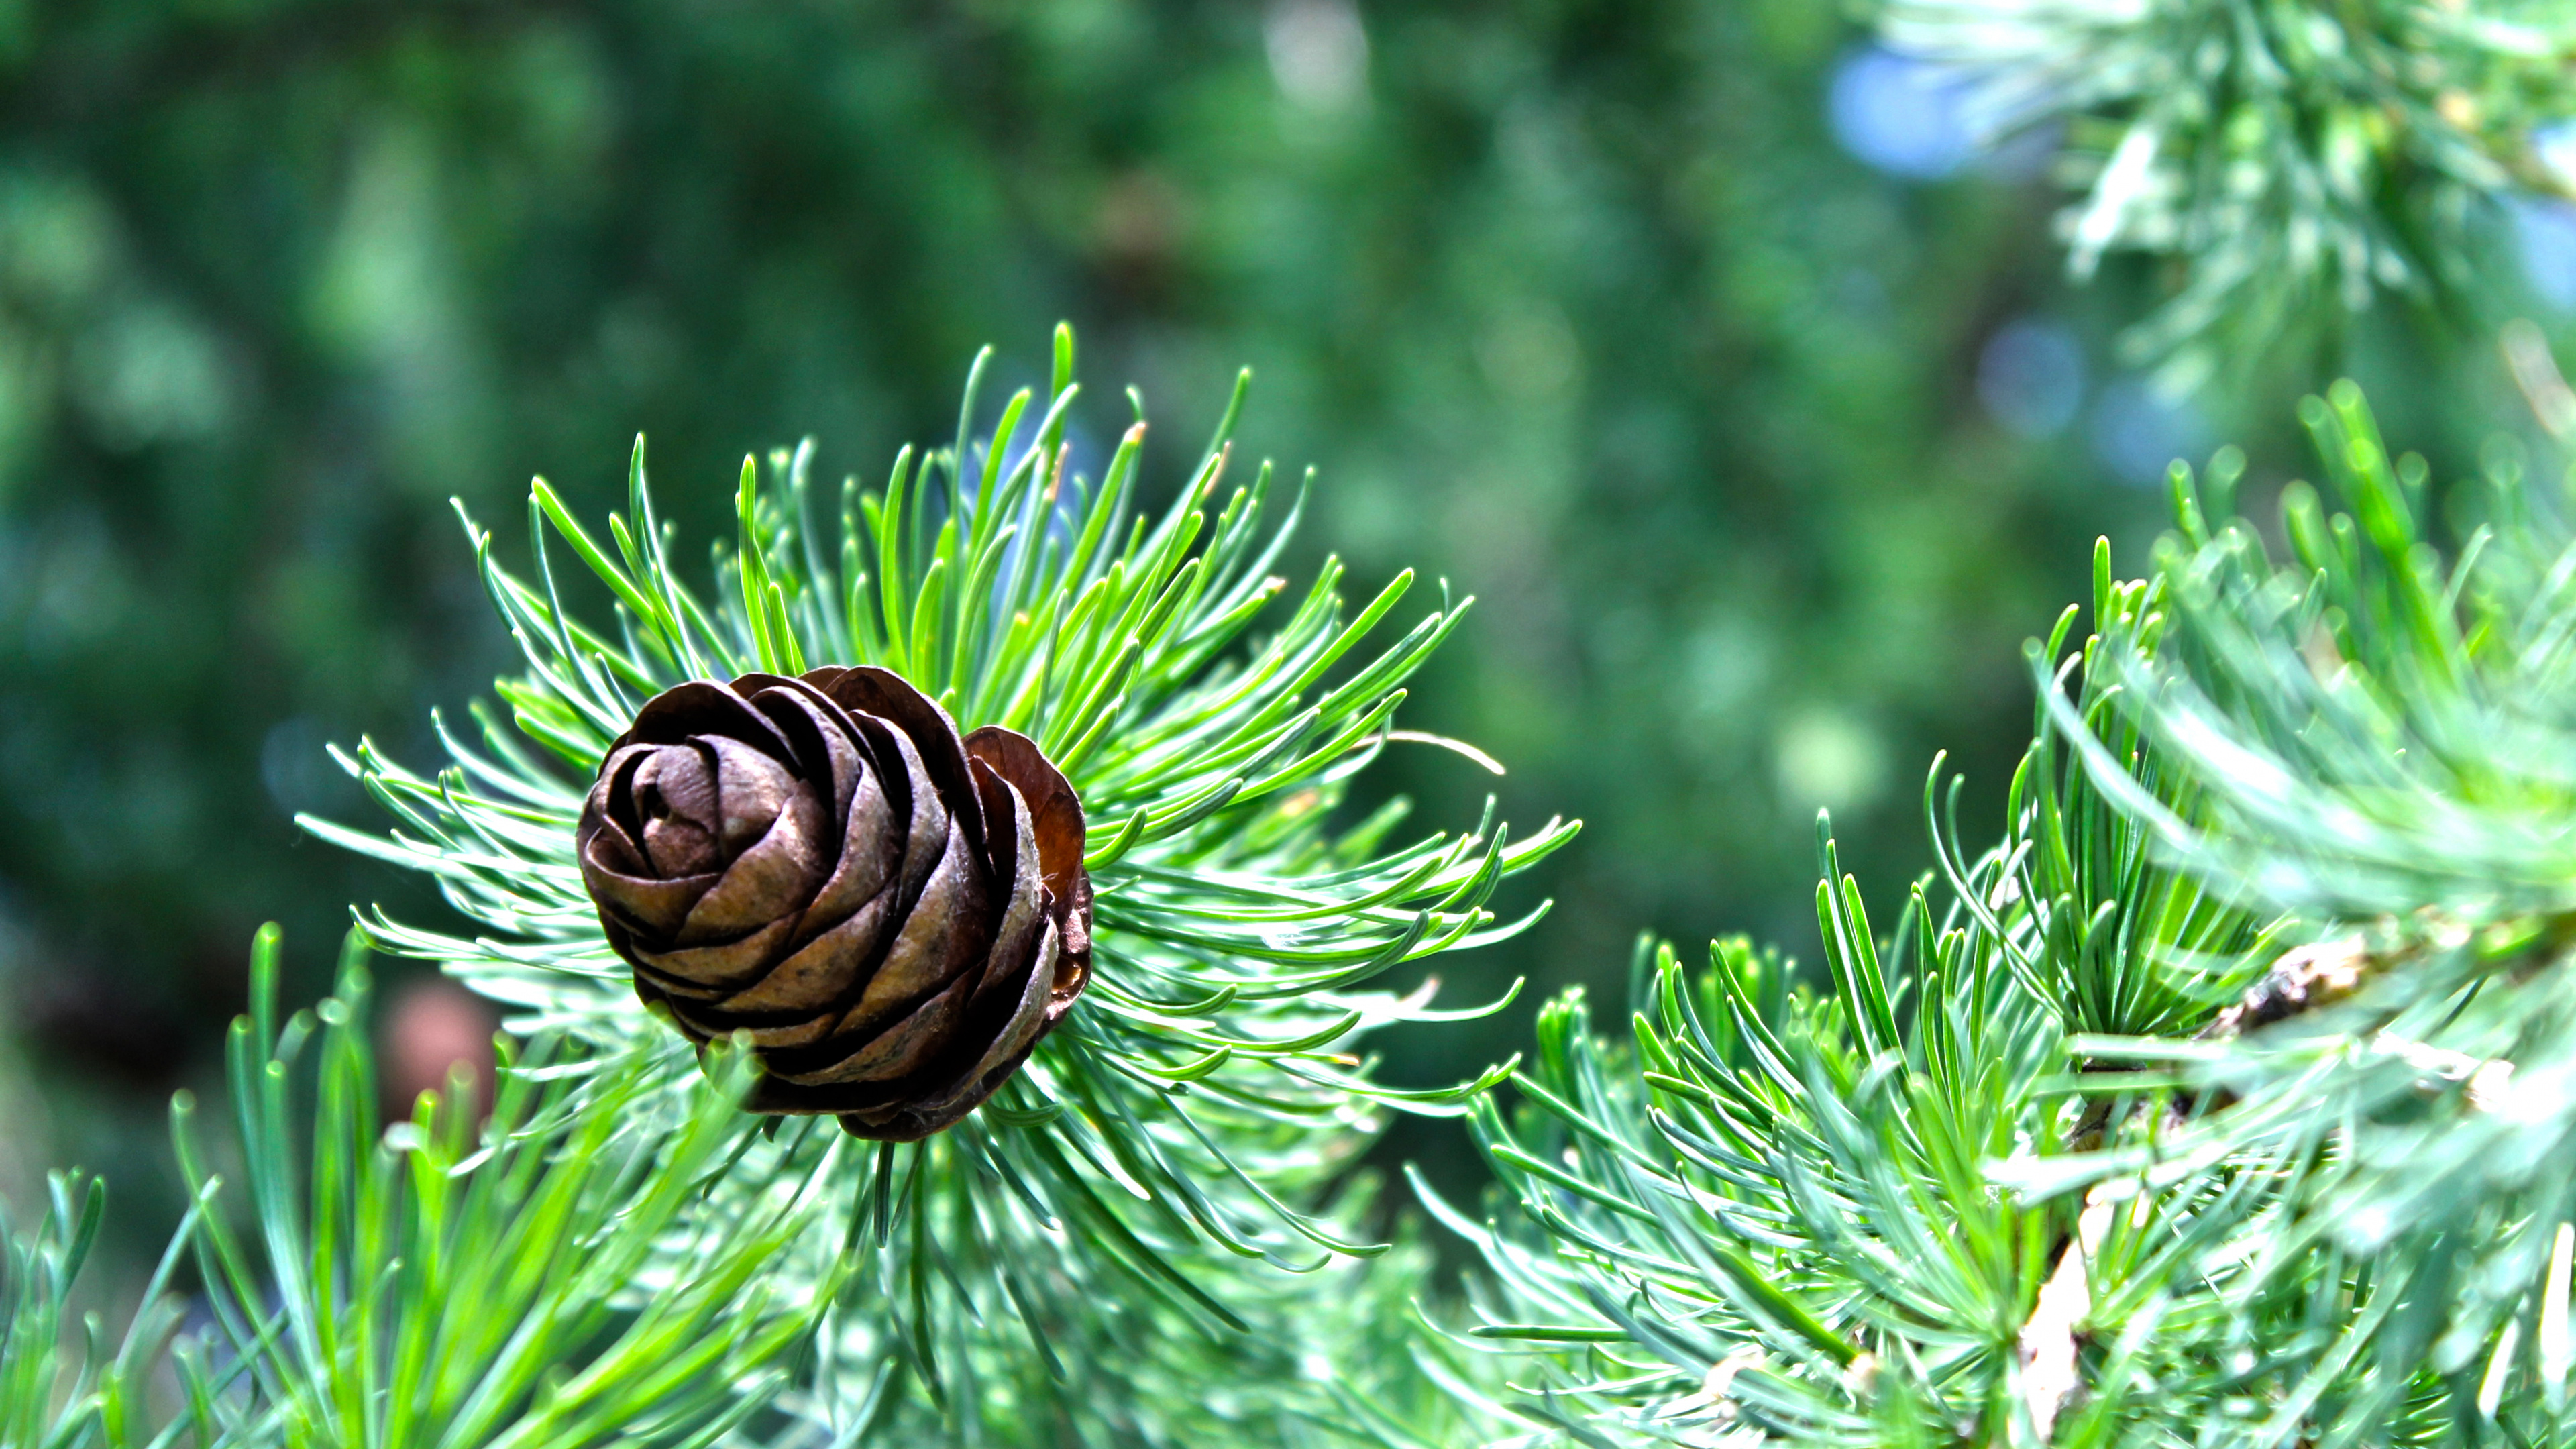 Brown Snail on Green Plant. Wallpaper in 3840x2160 Resolution